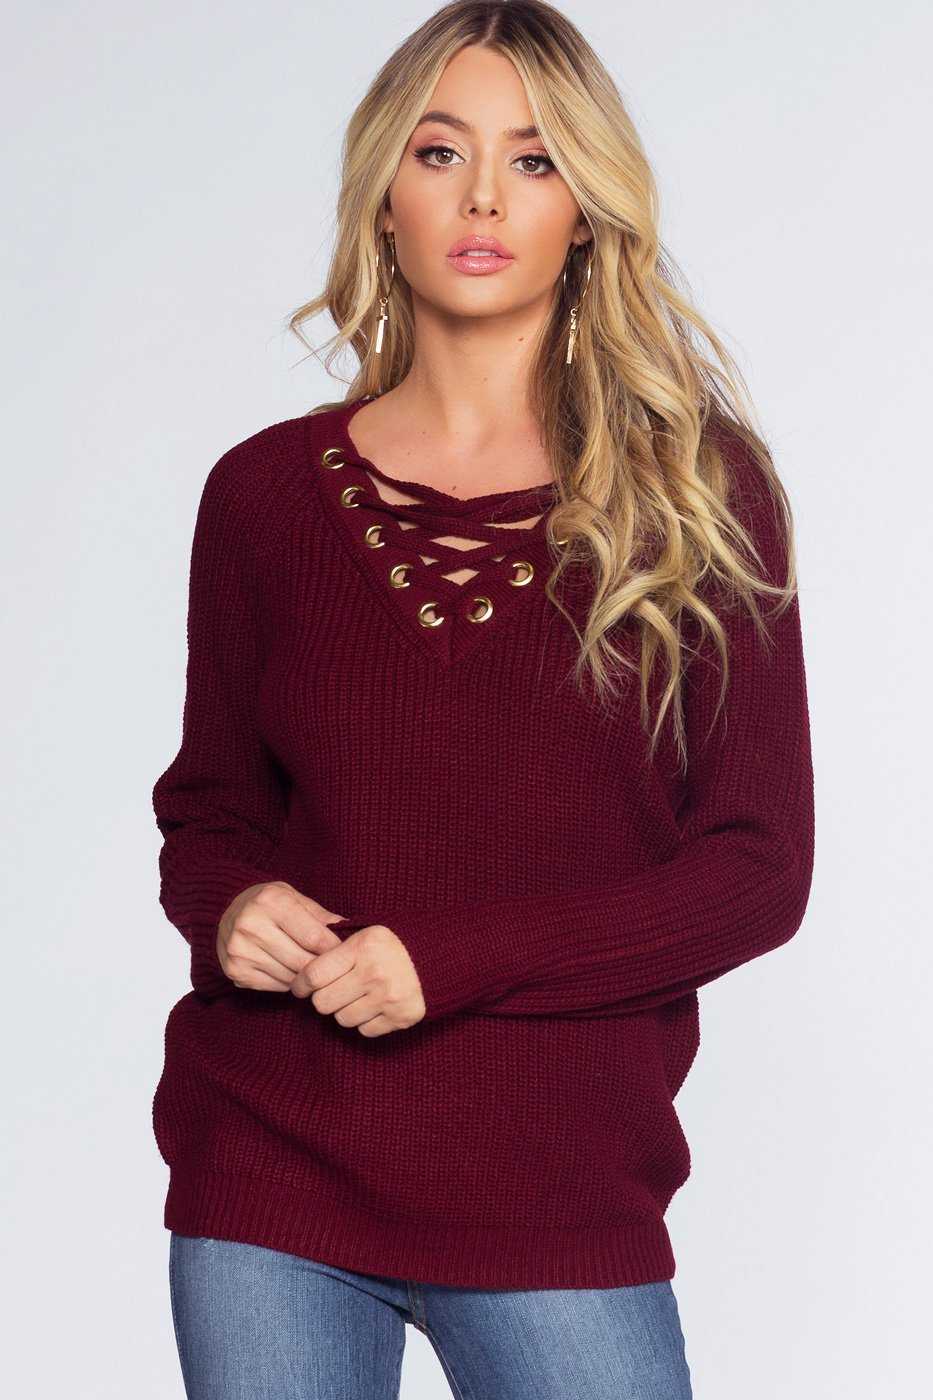 Sweaters - Elsa Lace Up Sweater - Burgundy